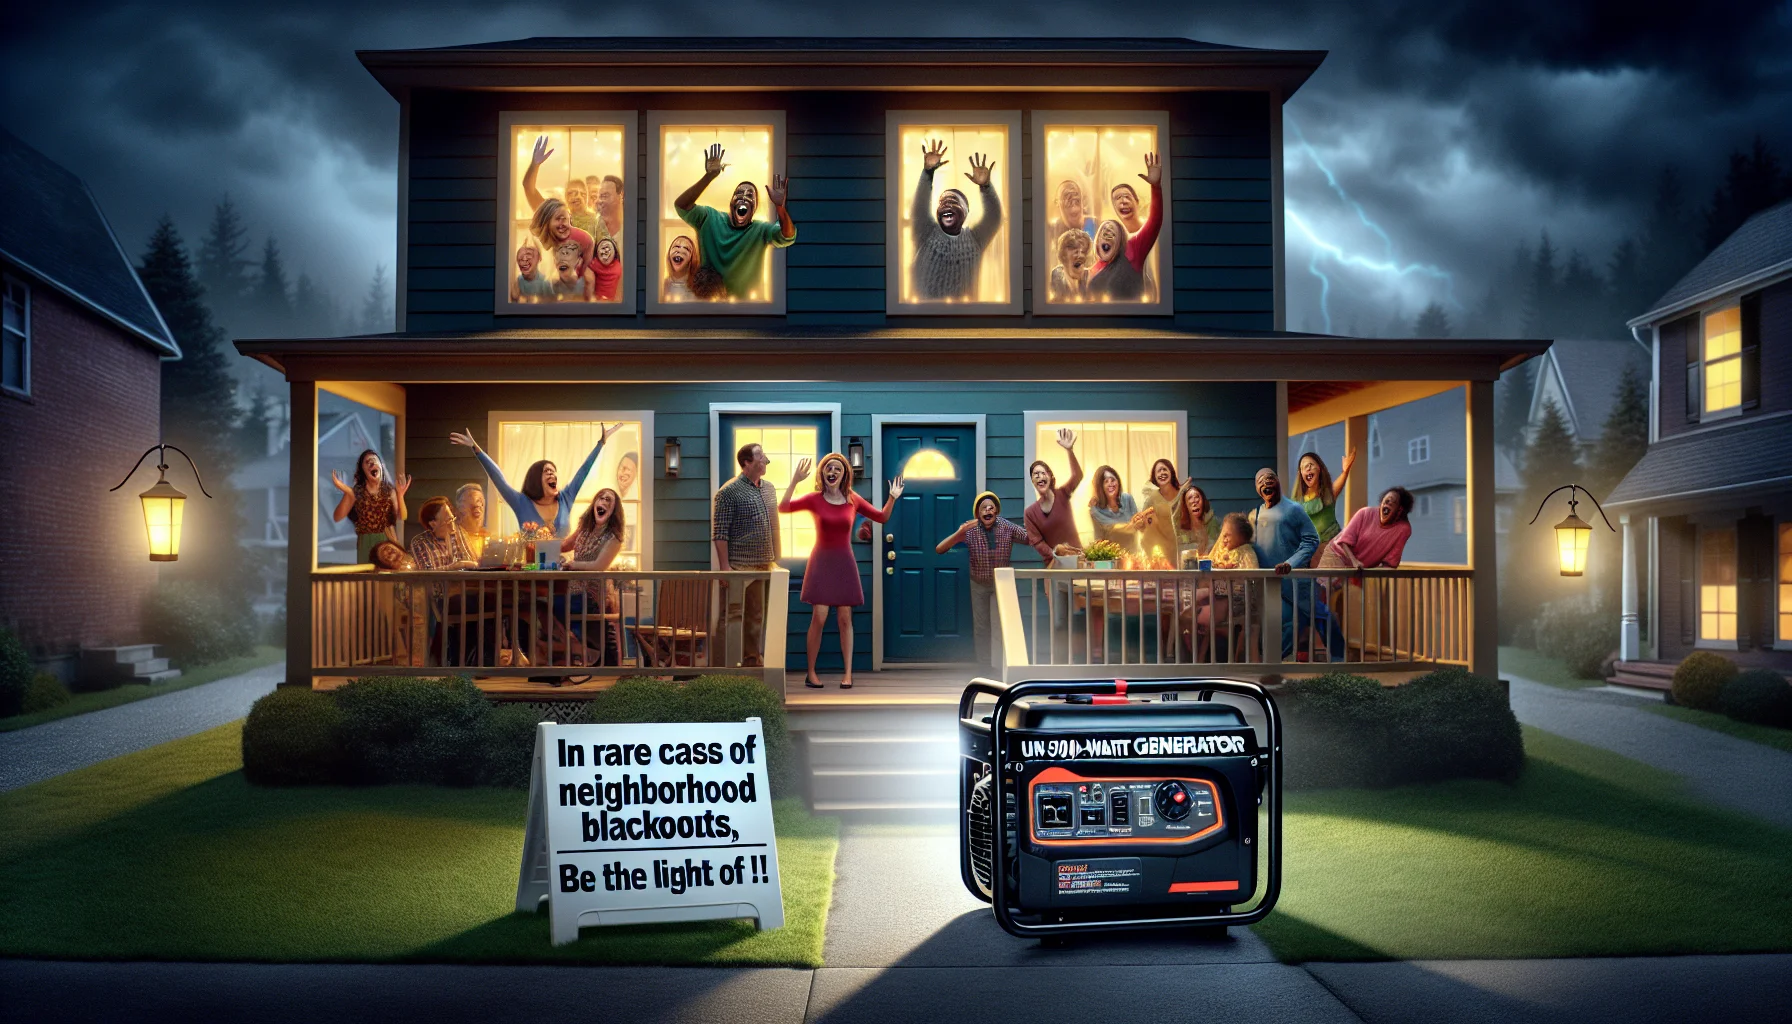 Create a humorous and enticing image showing an unbranded portable 5000-watt generator. In the scene, an amused group of people from diverse descents wave through the windows from a brightly lit house in the middle of the night, surrounded by darkness, the house alone is gleaming with lights. A sign placed next to the generator humorously reads, 'In rare cases of neighborhood blackouts, be the light of the party!'. Each person emits joy and surprise at the working generator power, as they enjoy their late-night activities in the warm light, while their neighbors' homes lay dark in the background.